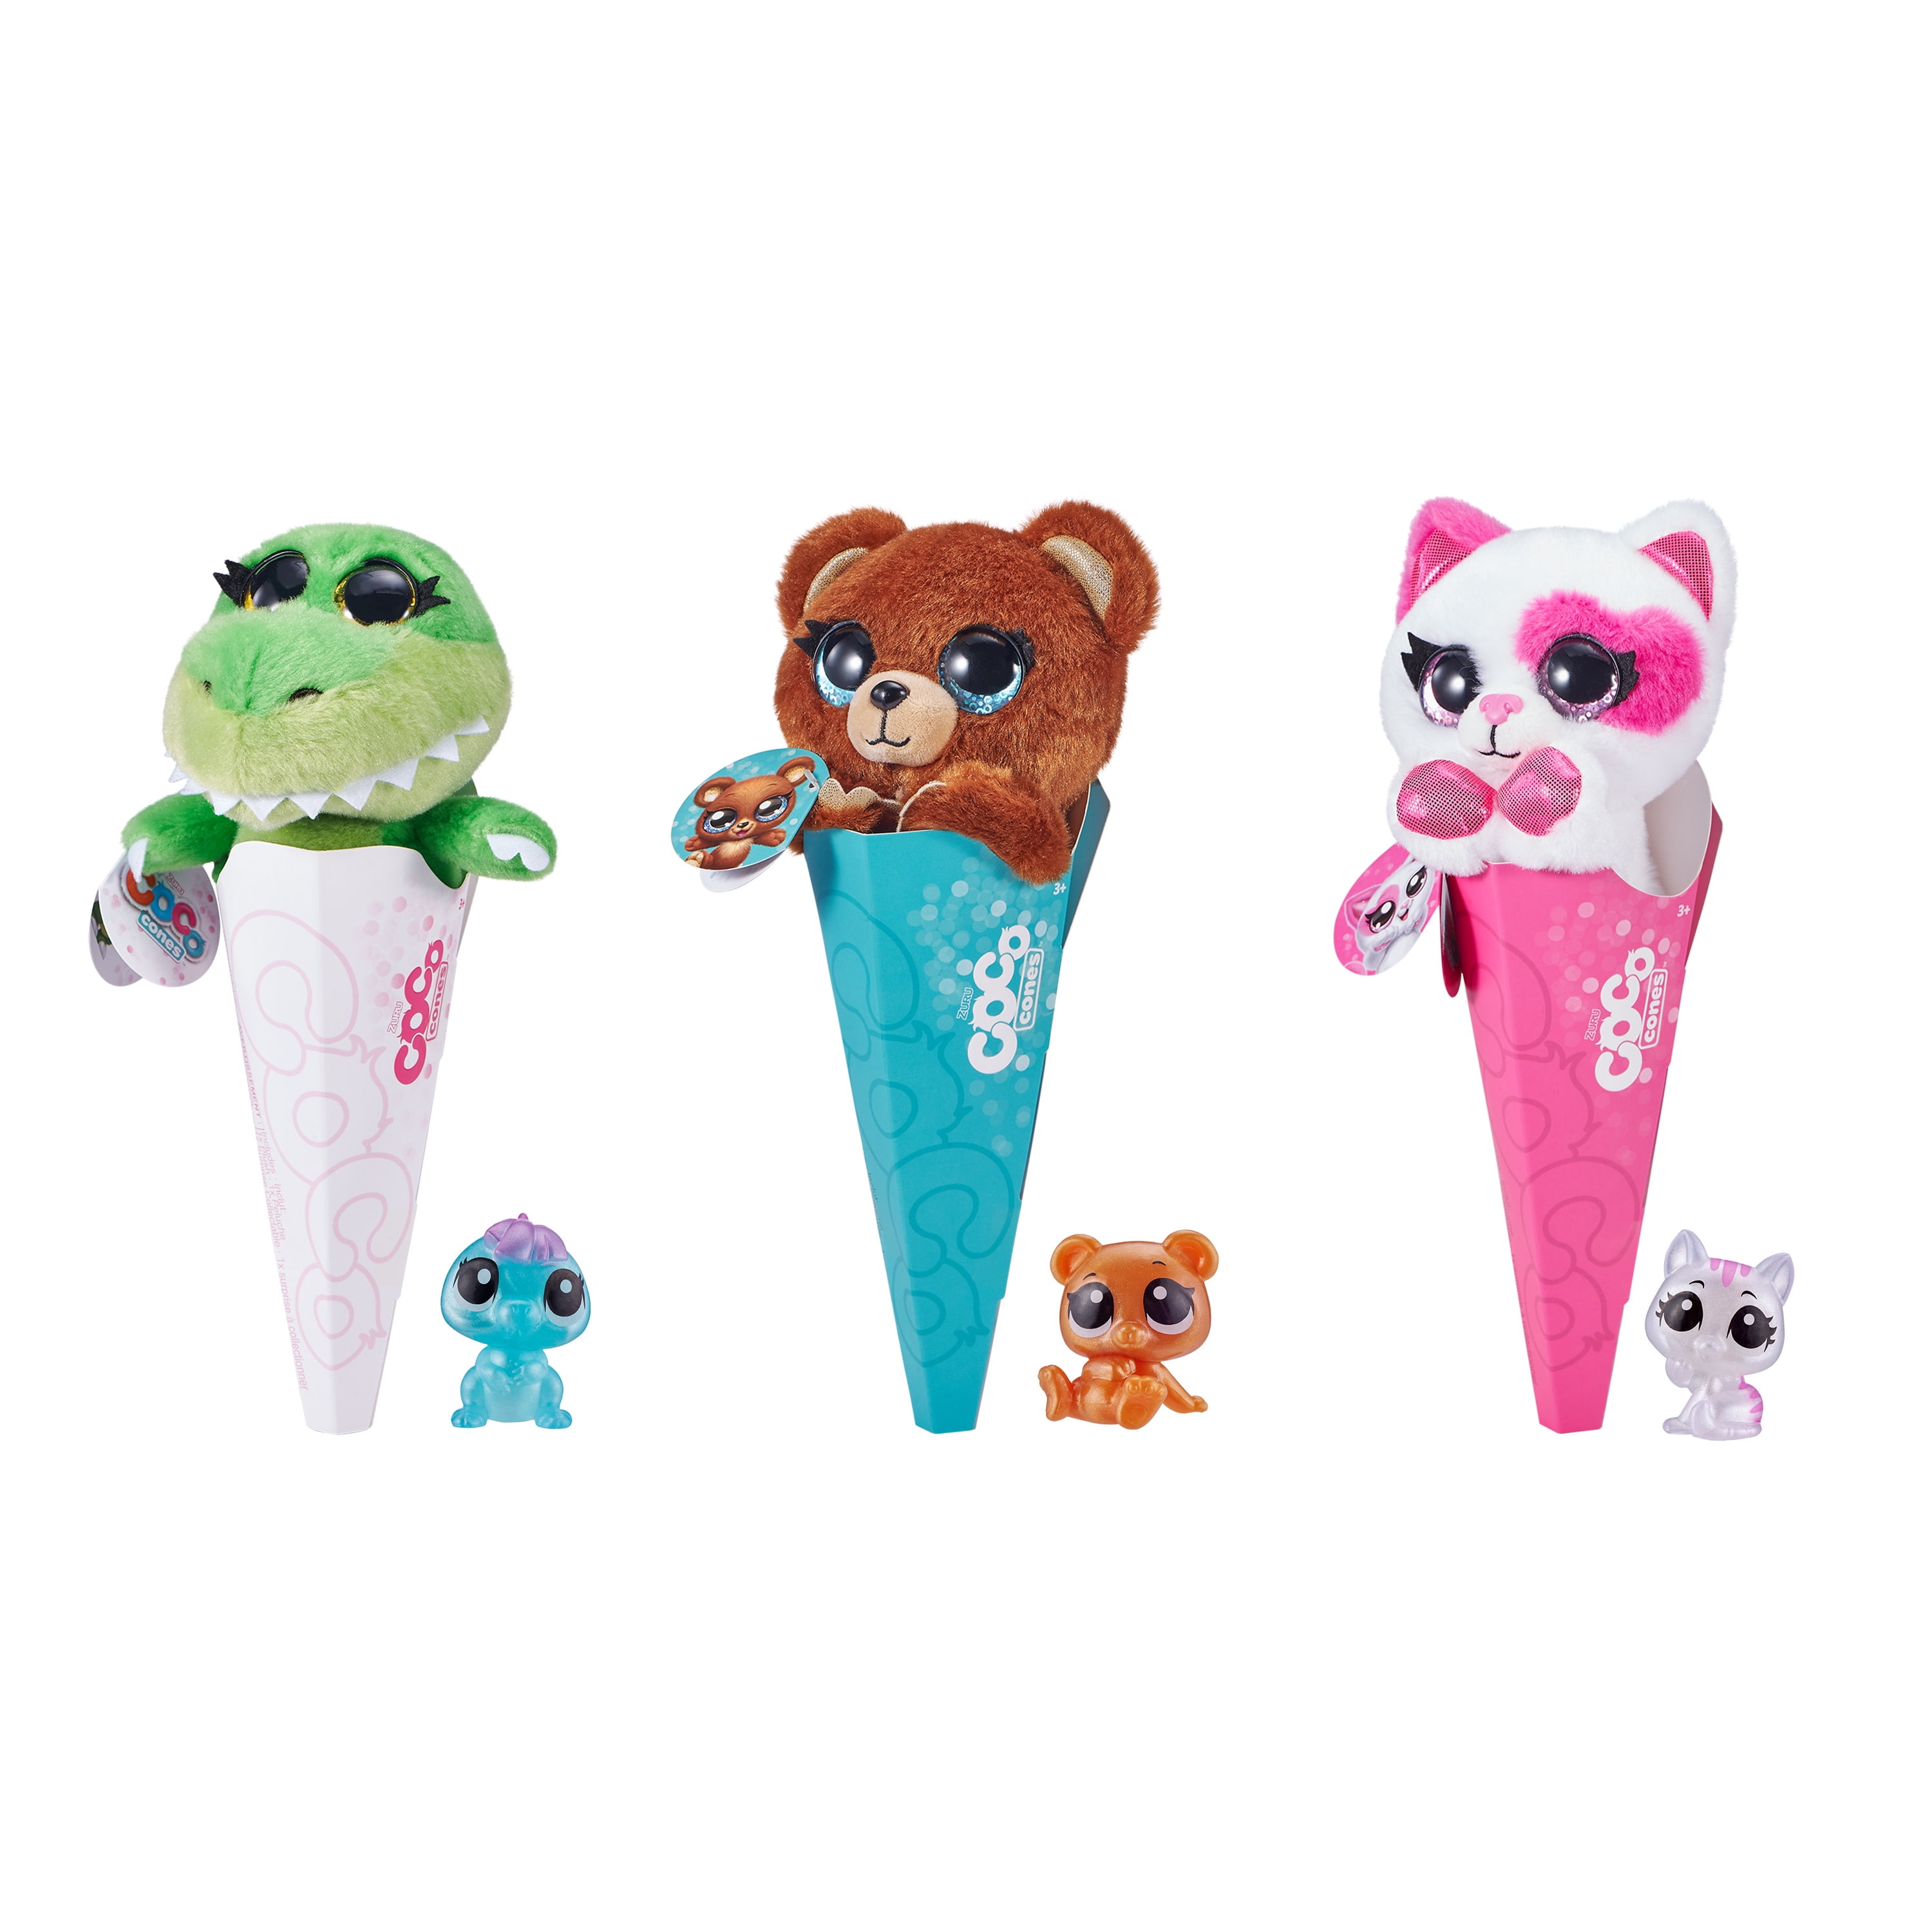 Coco Surprise Coco Cones 3 Pack Randomly Assorted Surprise Plush Toys with Baby Collectible Surprise in Cone by Zuru 193052005700 